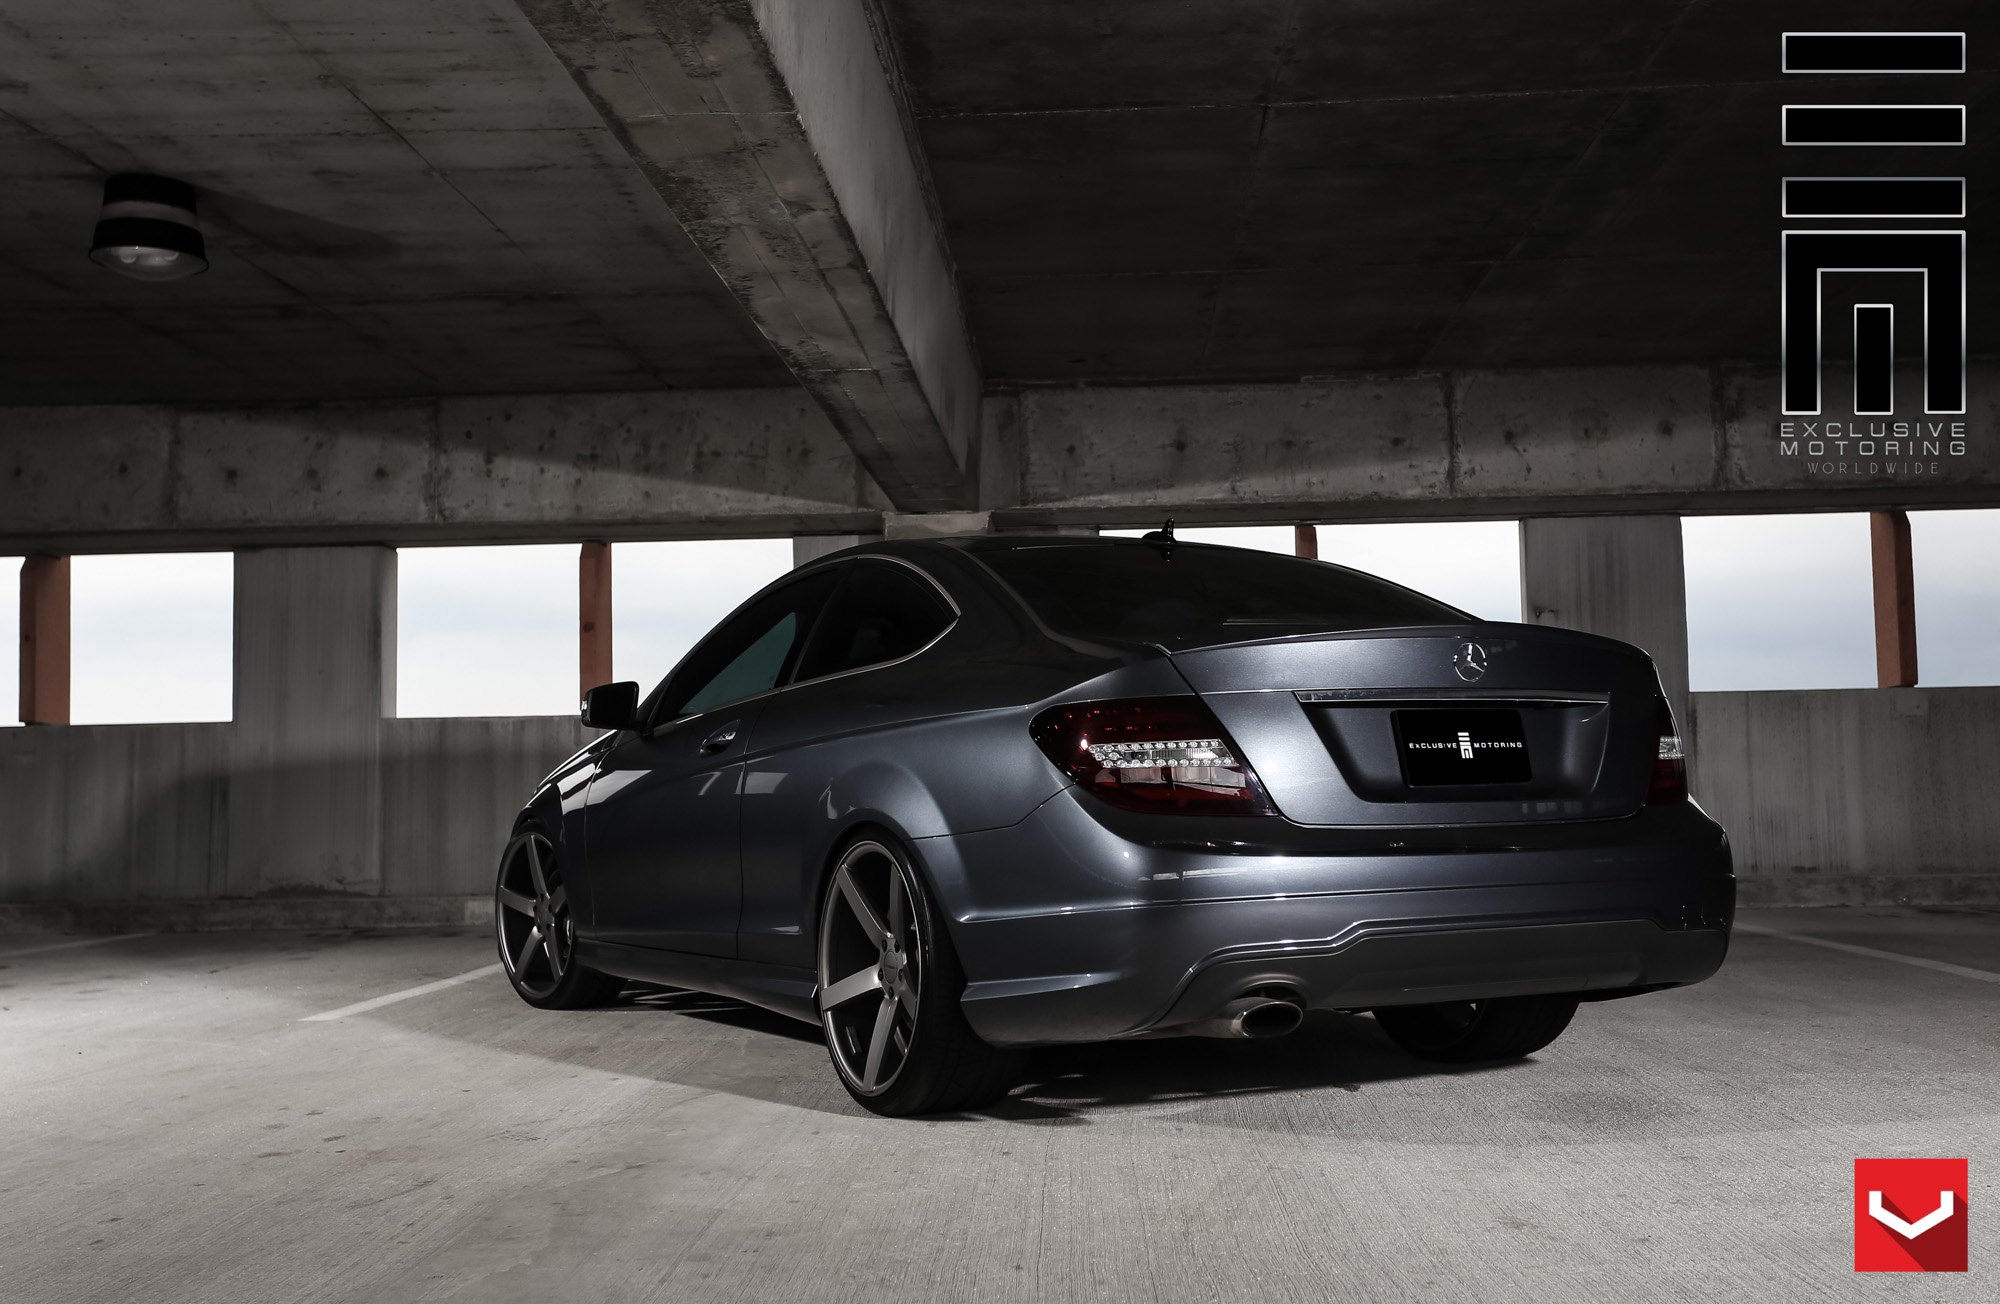 Custom LED Taillights on Black Mercedes C Class - Photo by Vossen